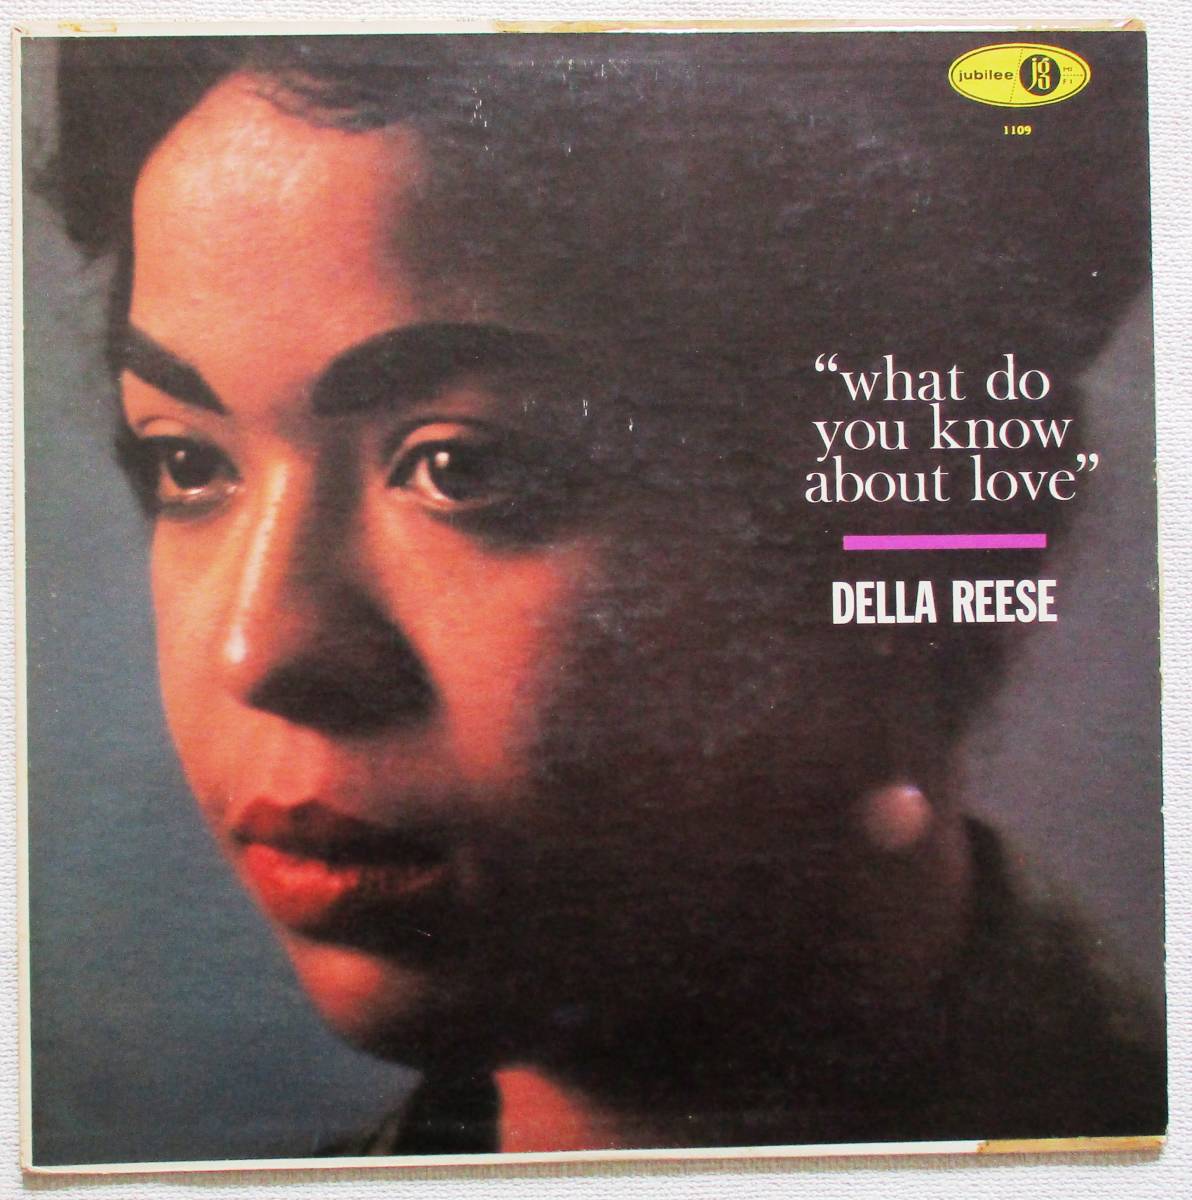 Della Reese ＂ What Do You Know About Love ? ” 　30㎝LP USAオリジナル　195ｇ超重量盤_画像1